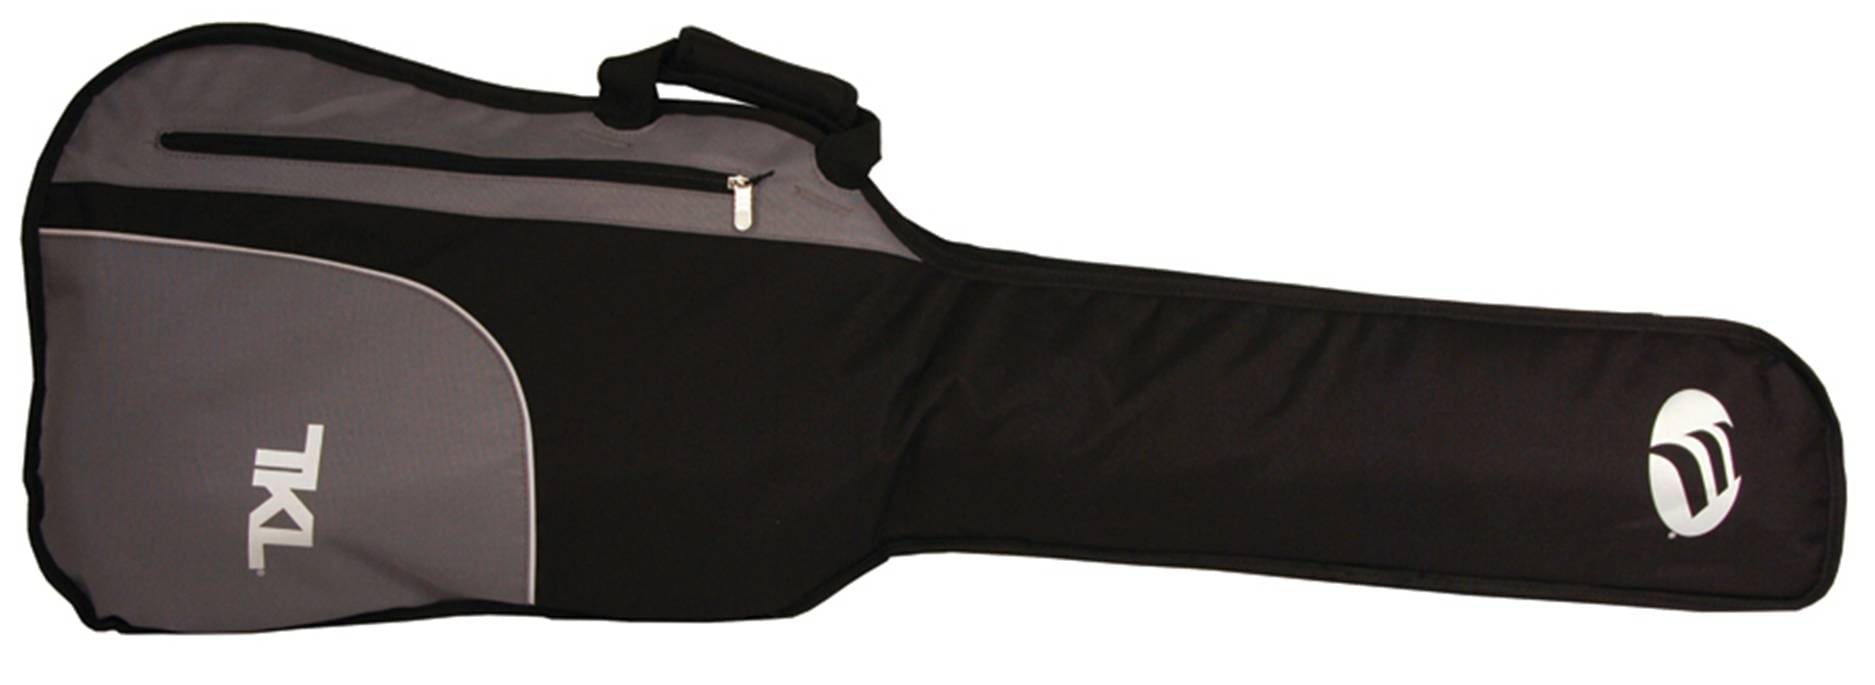 Bass Gig Bag Padded for P, J and other bass guitar shapes - Victor Litz